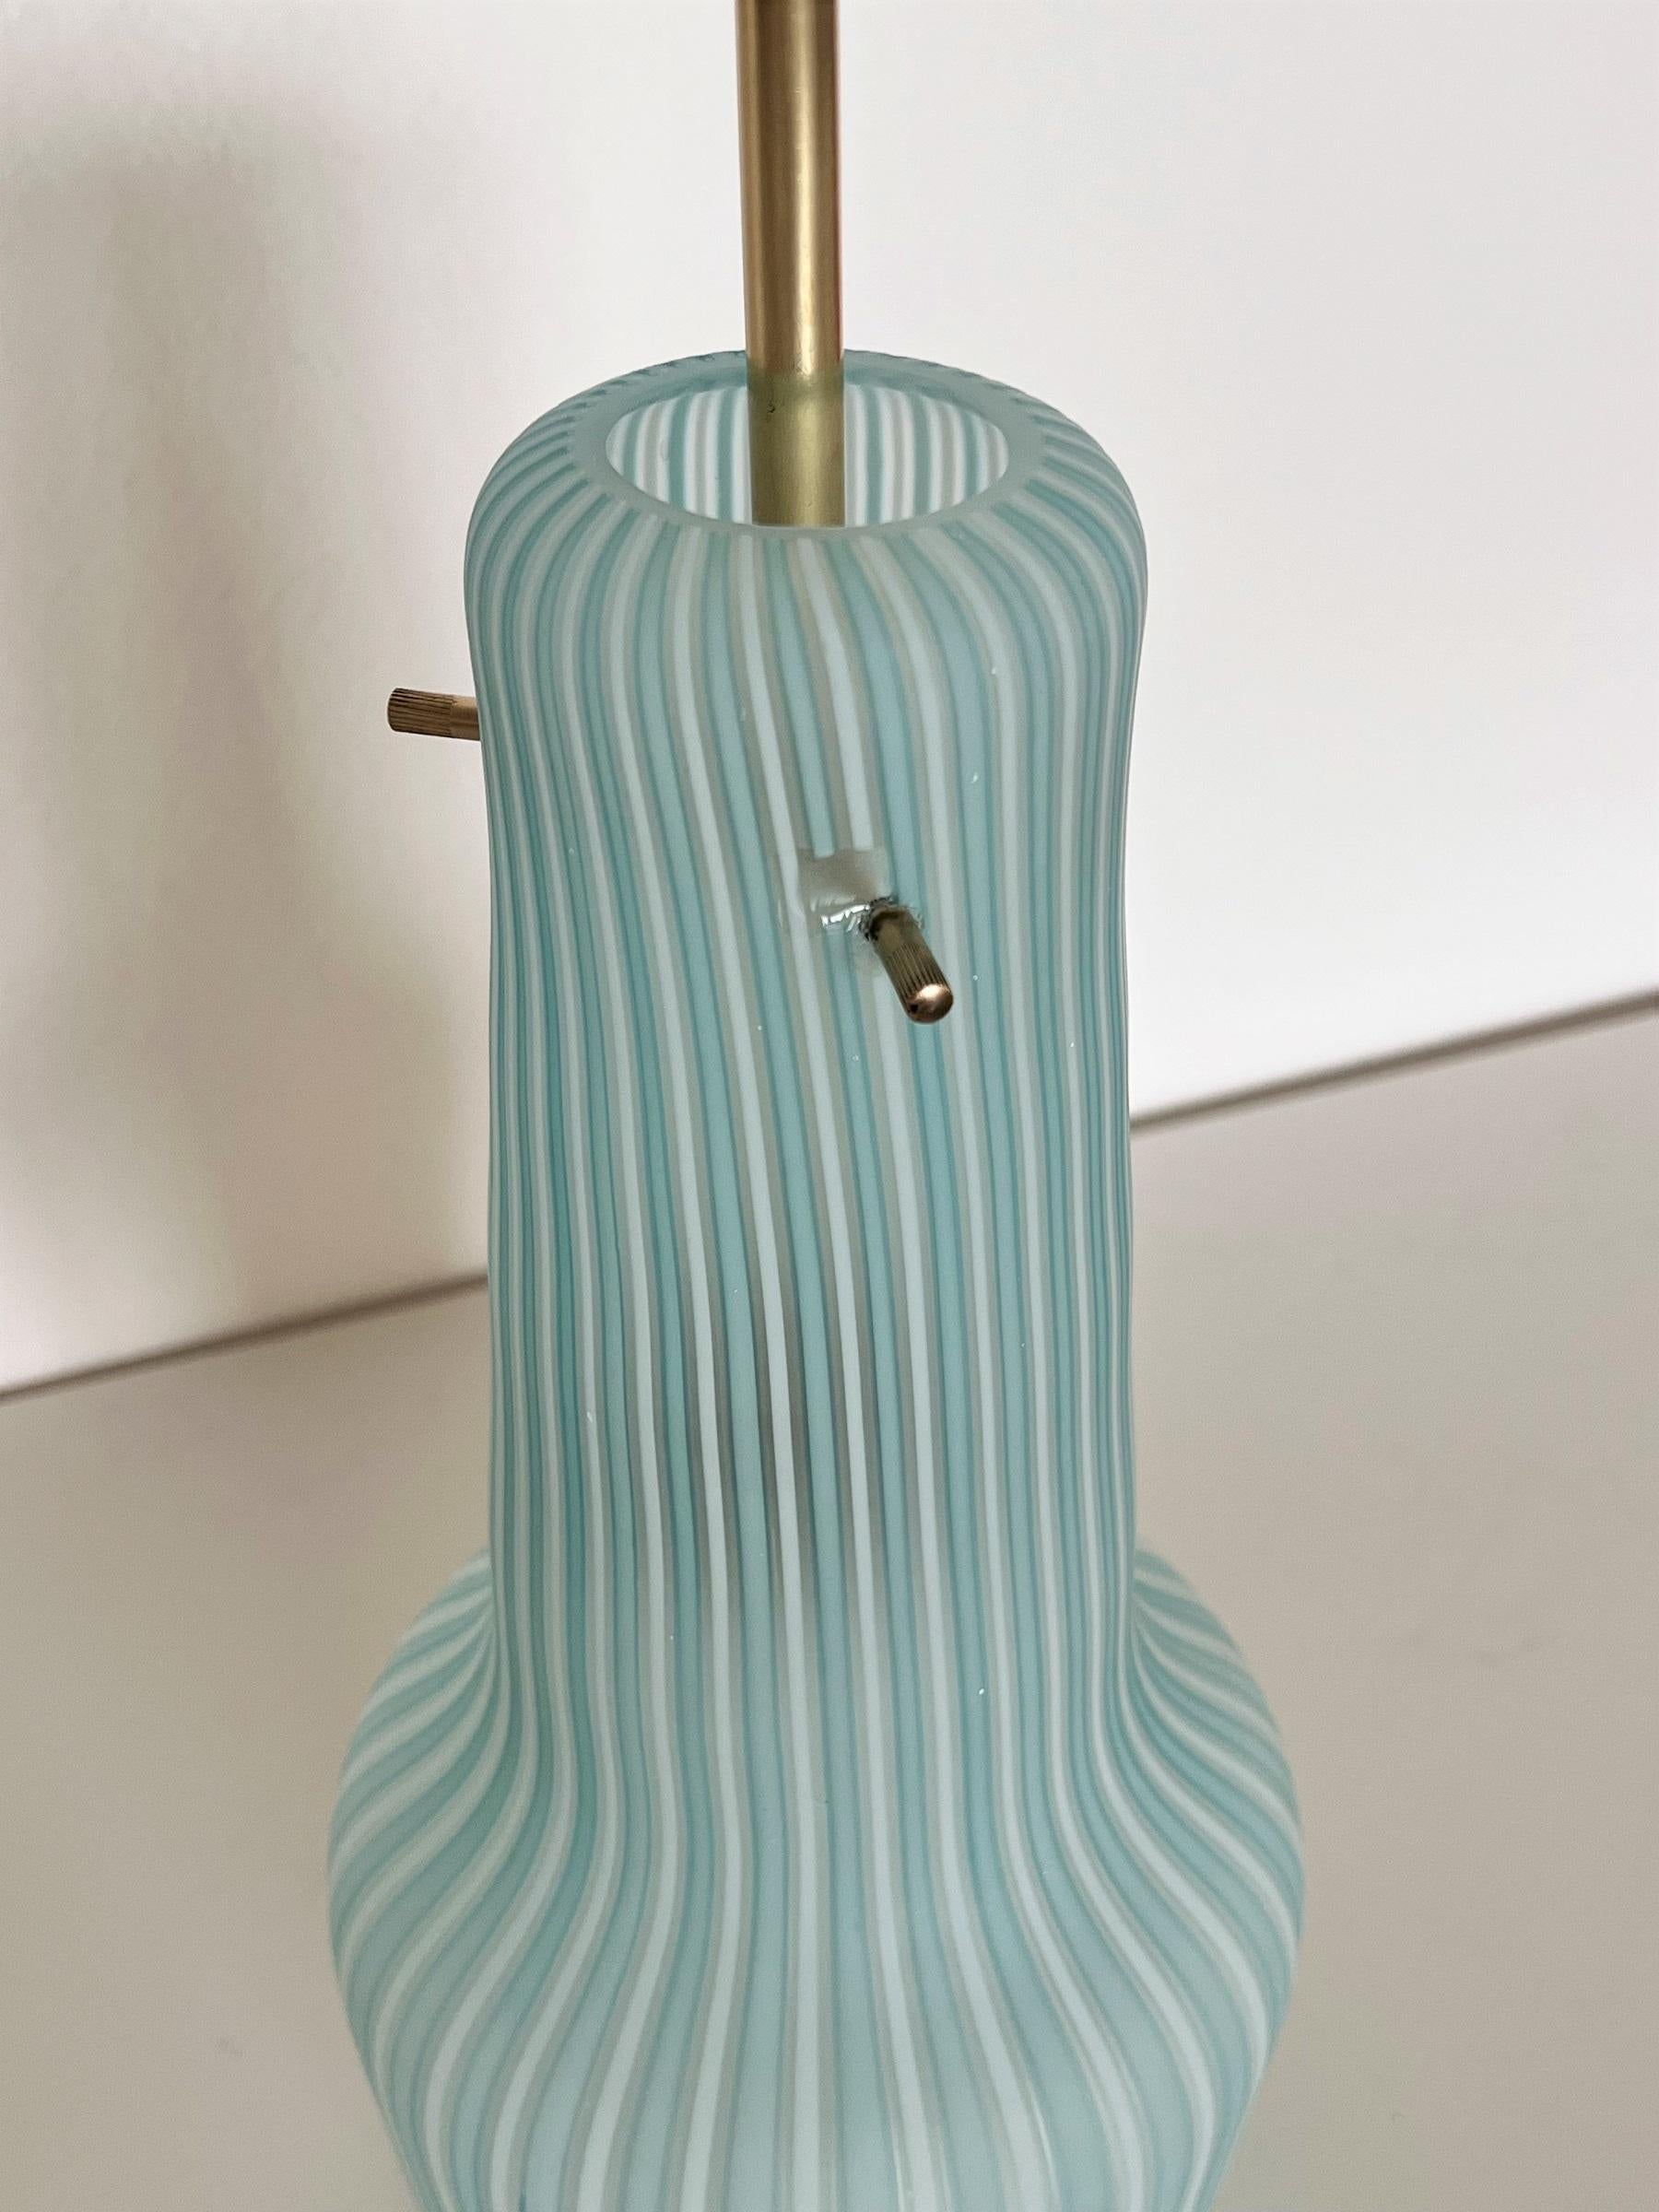 Italian Mid-Century Pendant Lamp in Striped Glass and Brass by Venini, 1960s For Sale 5